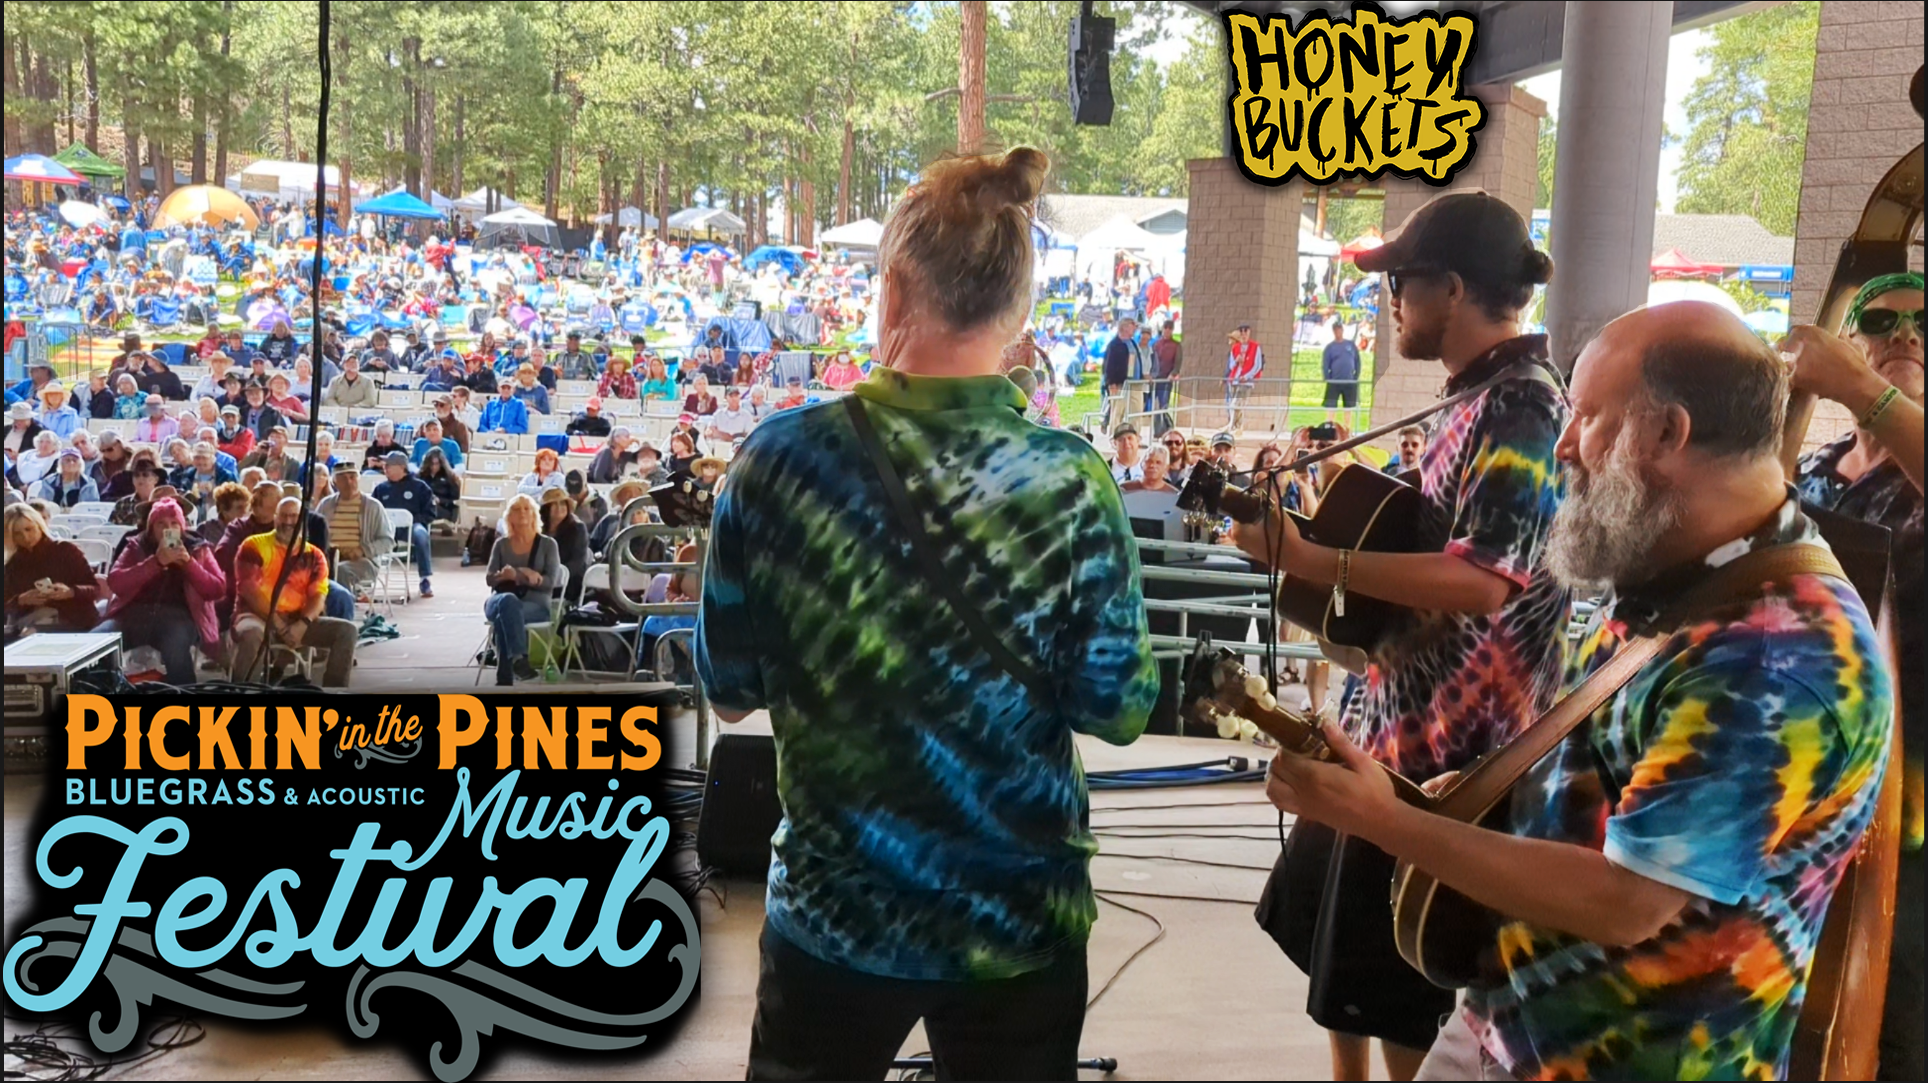 Pickin' in the Pines 2023 Honey Buckets